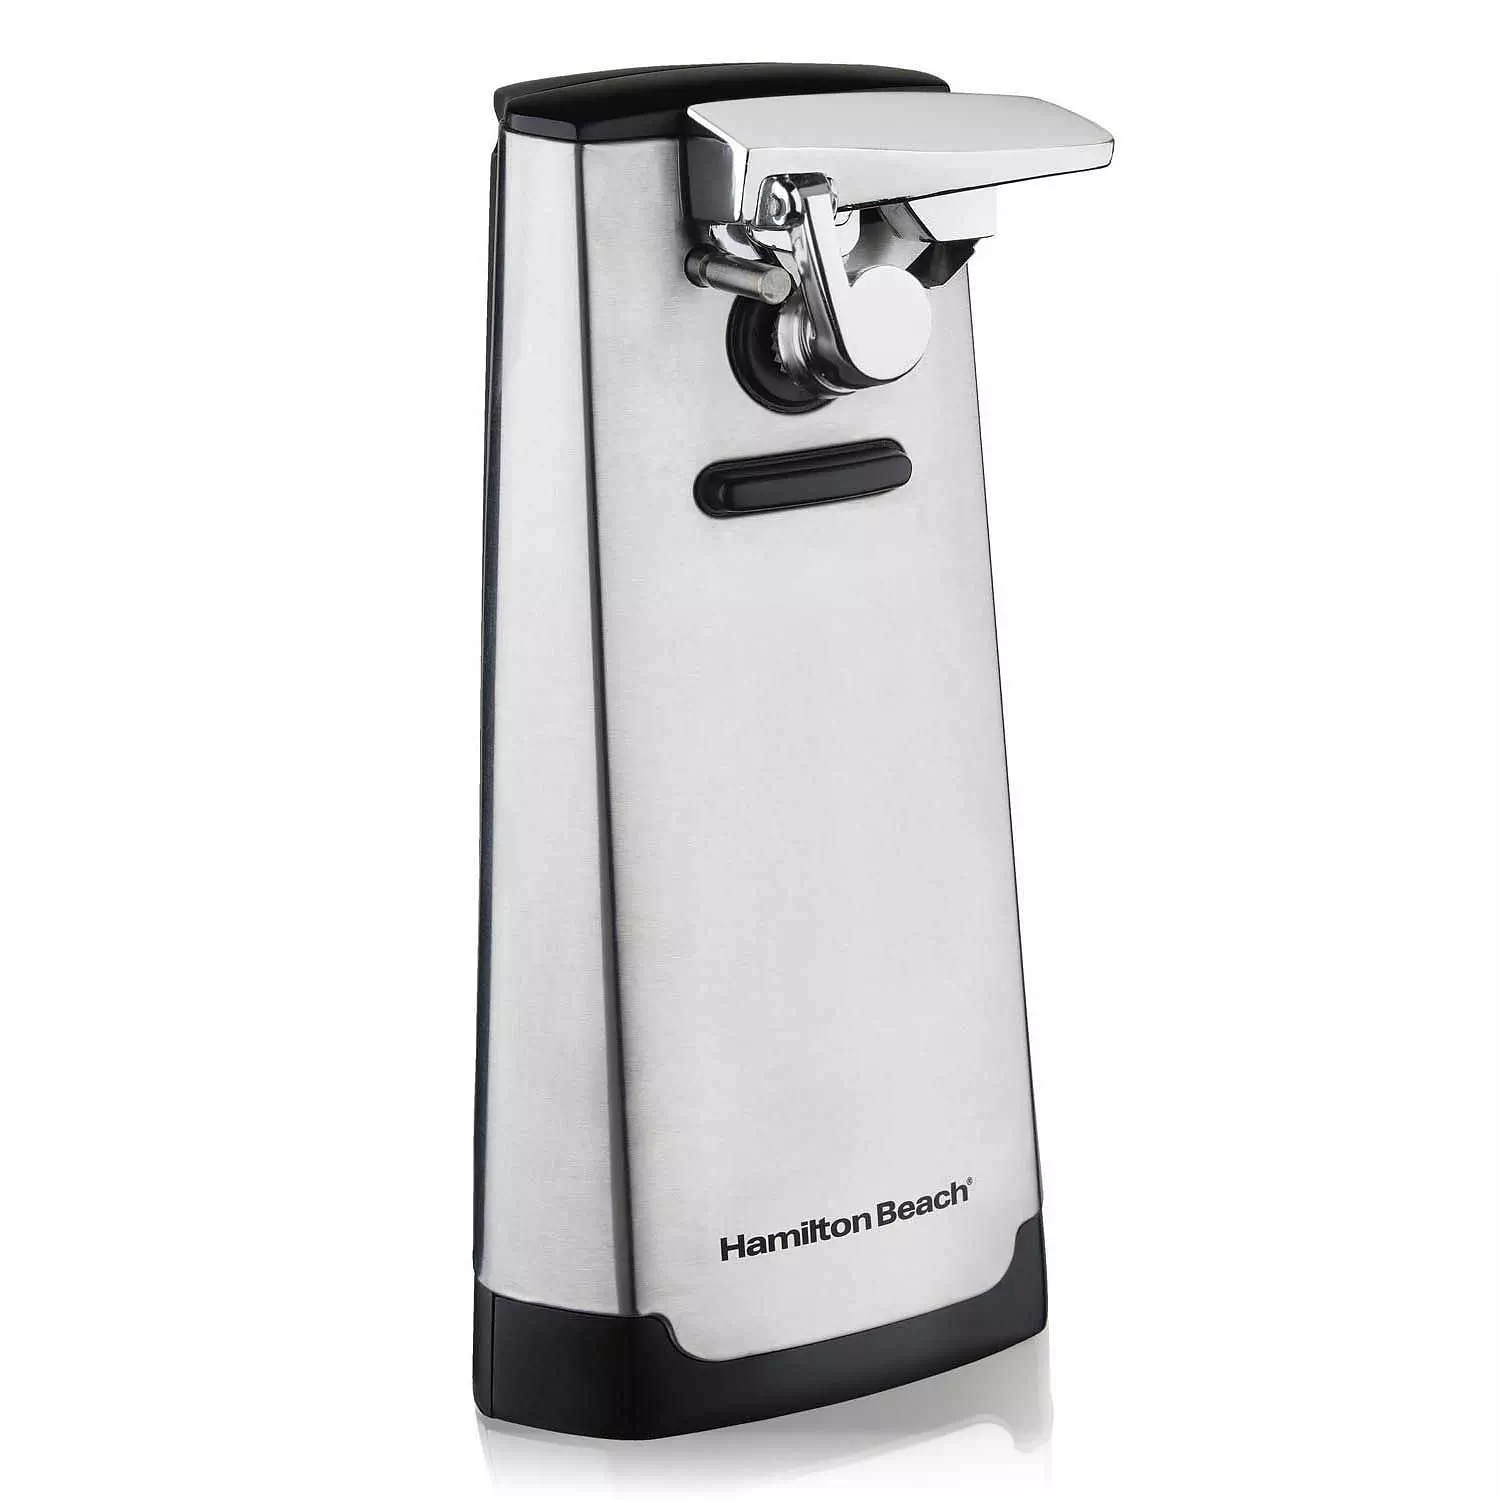 Hamilton Beach - Steel electric automatic can opener with knife sharpener